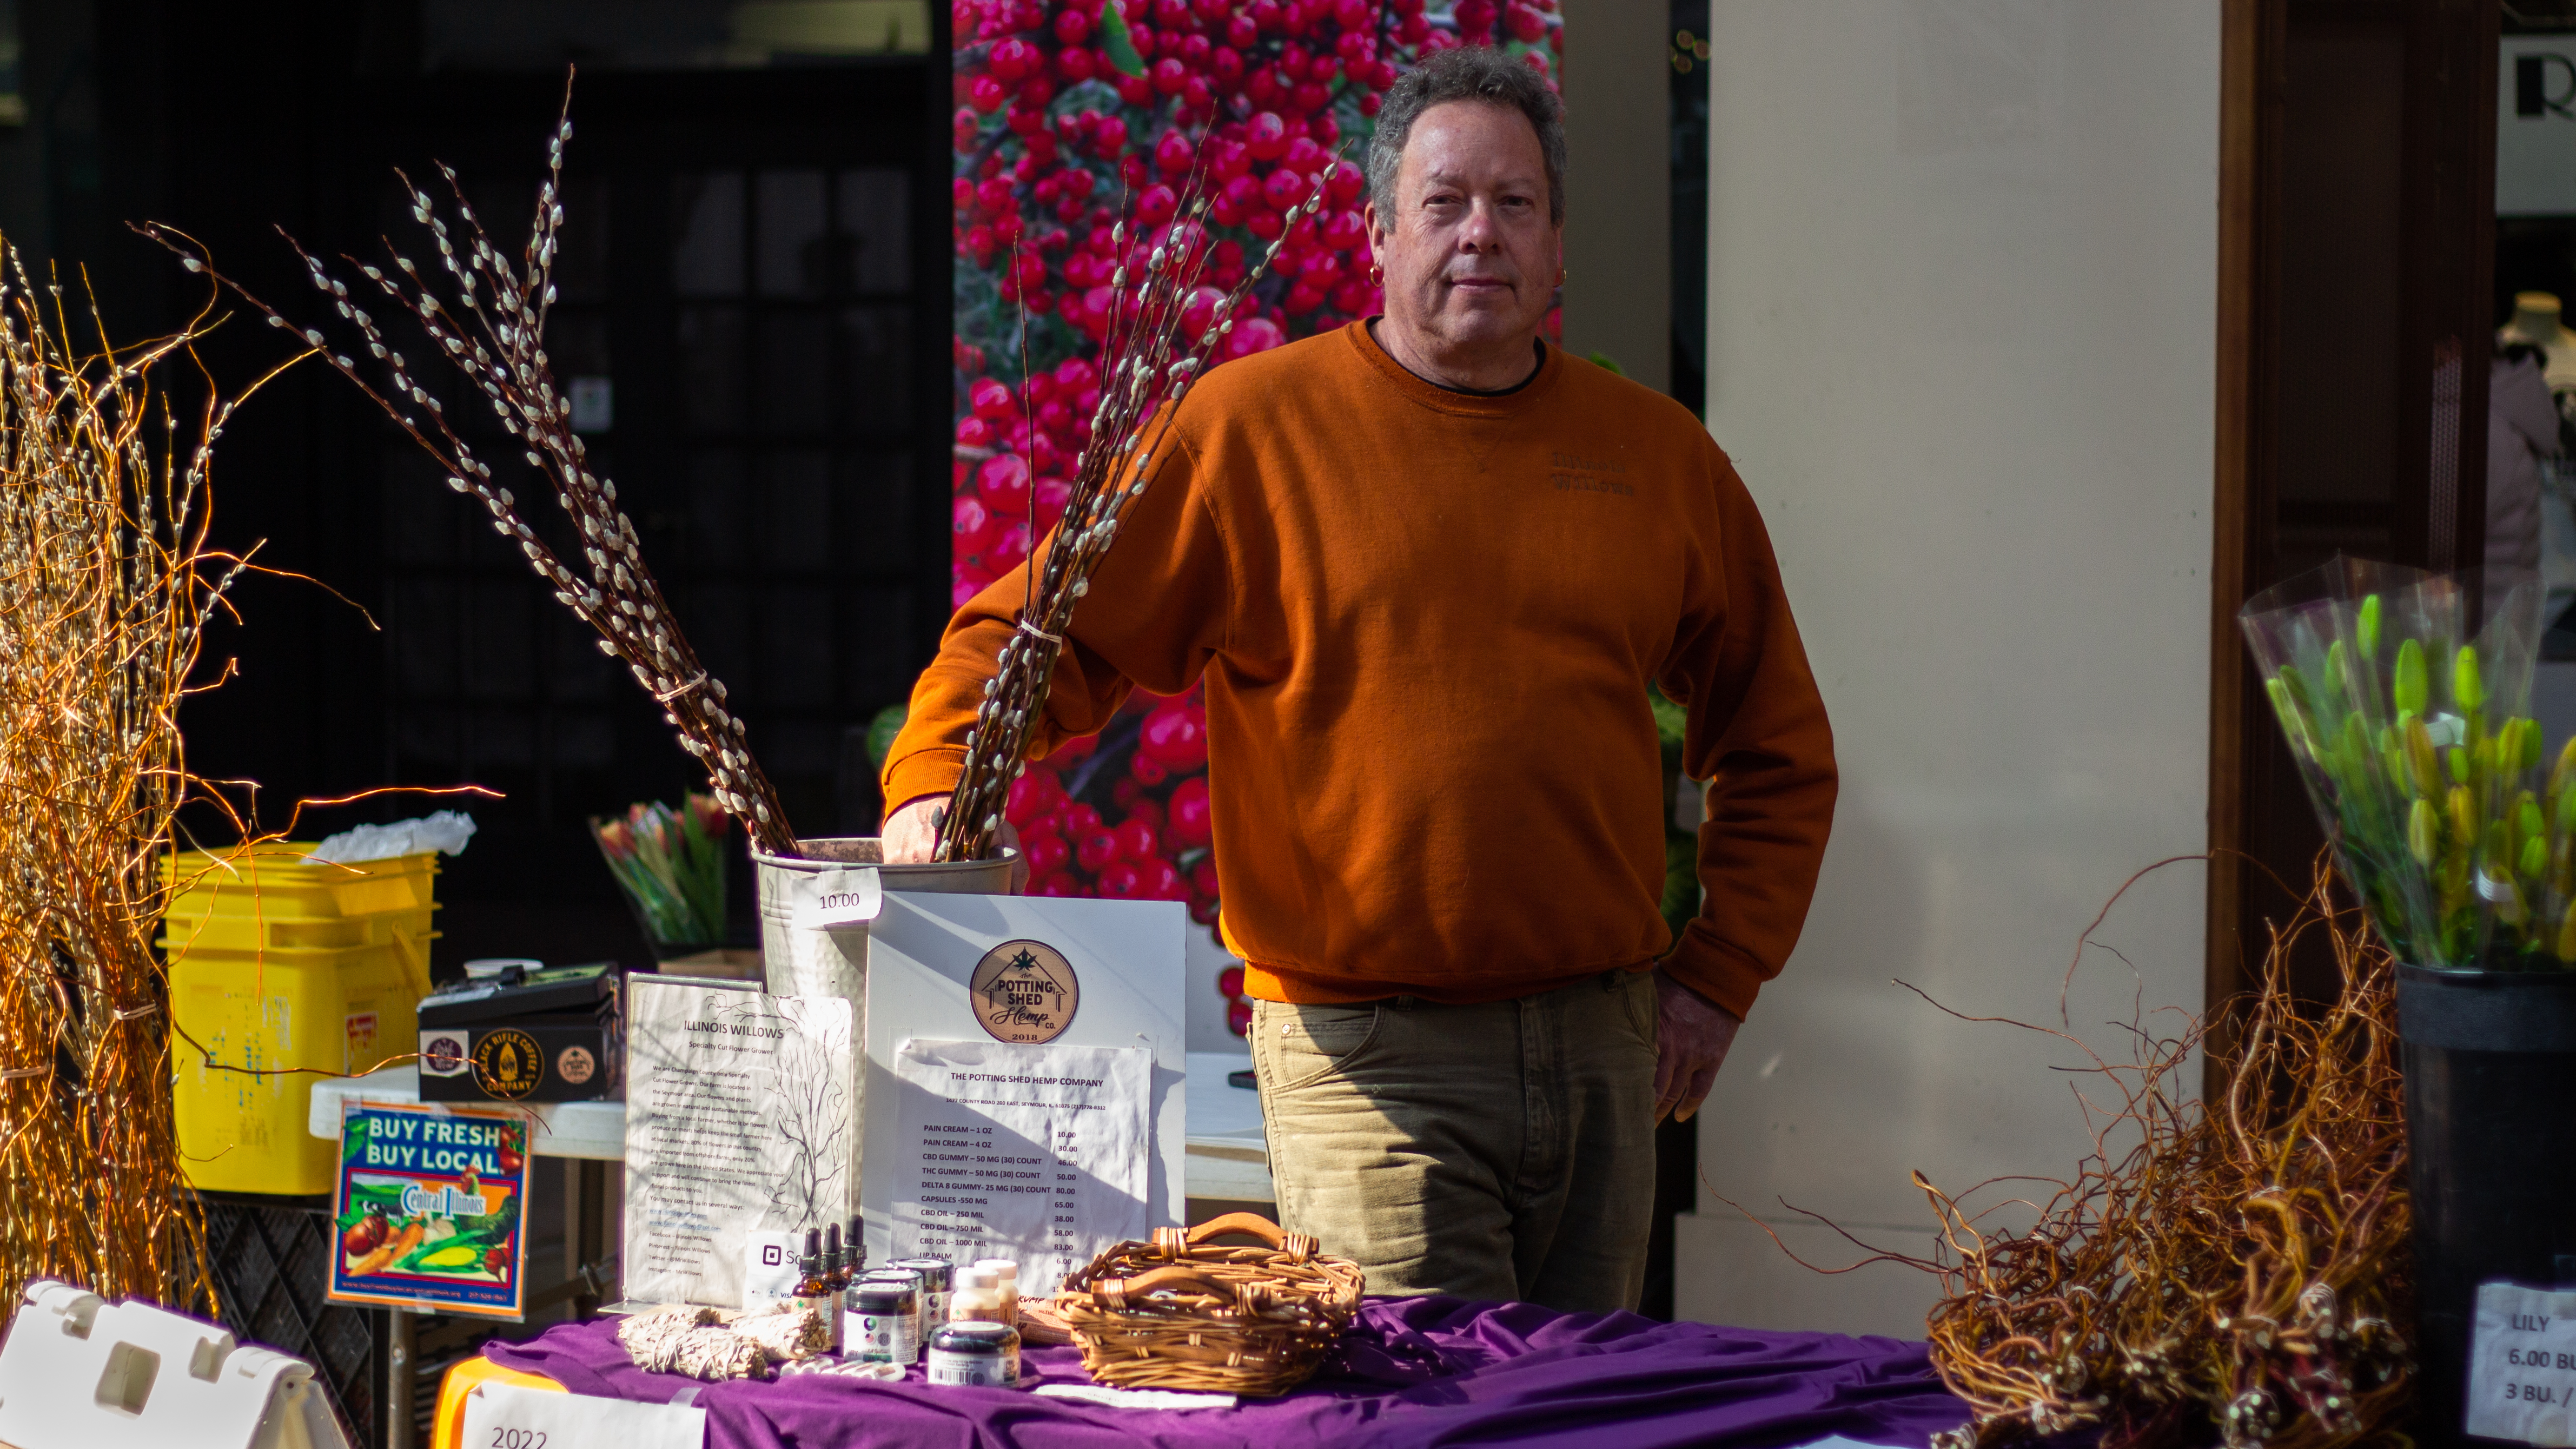 In view of the stand for Illinois Willows at the CU Winter Farmers Market located in Lincoln Square Mall. The table has a purple cloth over it and has an array of flowers, sage, and an assortment of CBD products. The representative of Illinois Willows, Kent Miles, stands behind the products. There is also a sign that reads â€œThe Potting Shed Hemp Companyâ€ and it lists the   prices for the different CBD products. Photo by Jorge Murga.